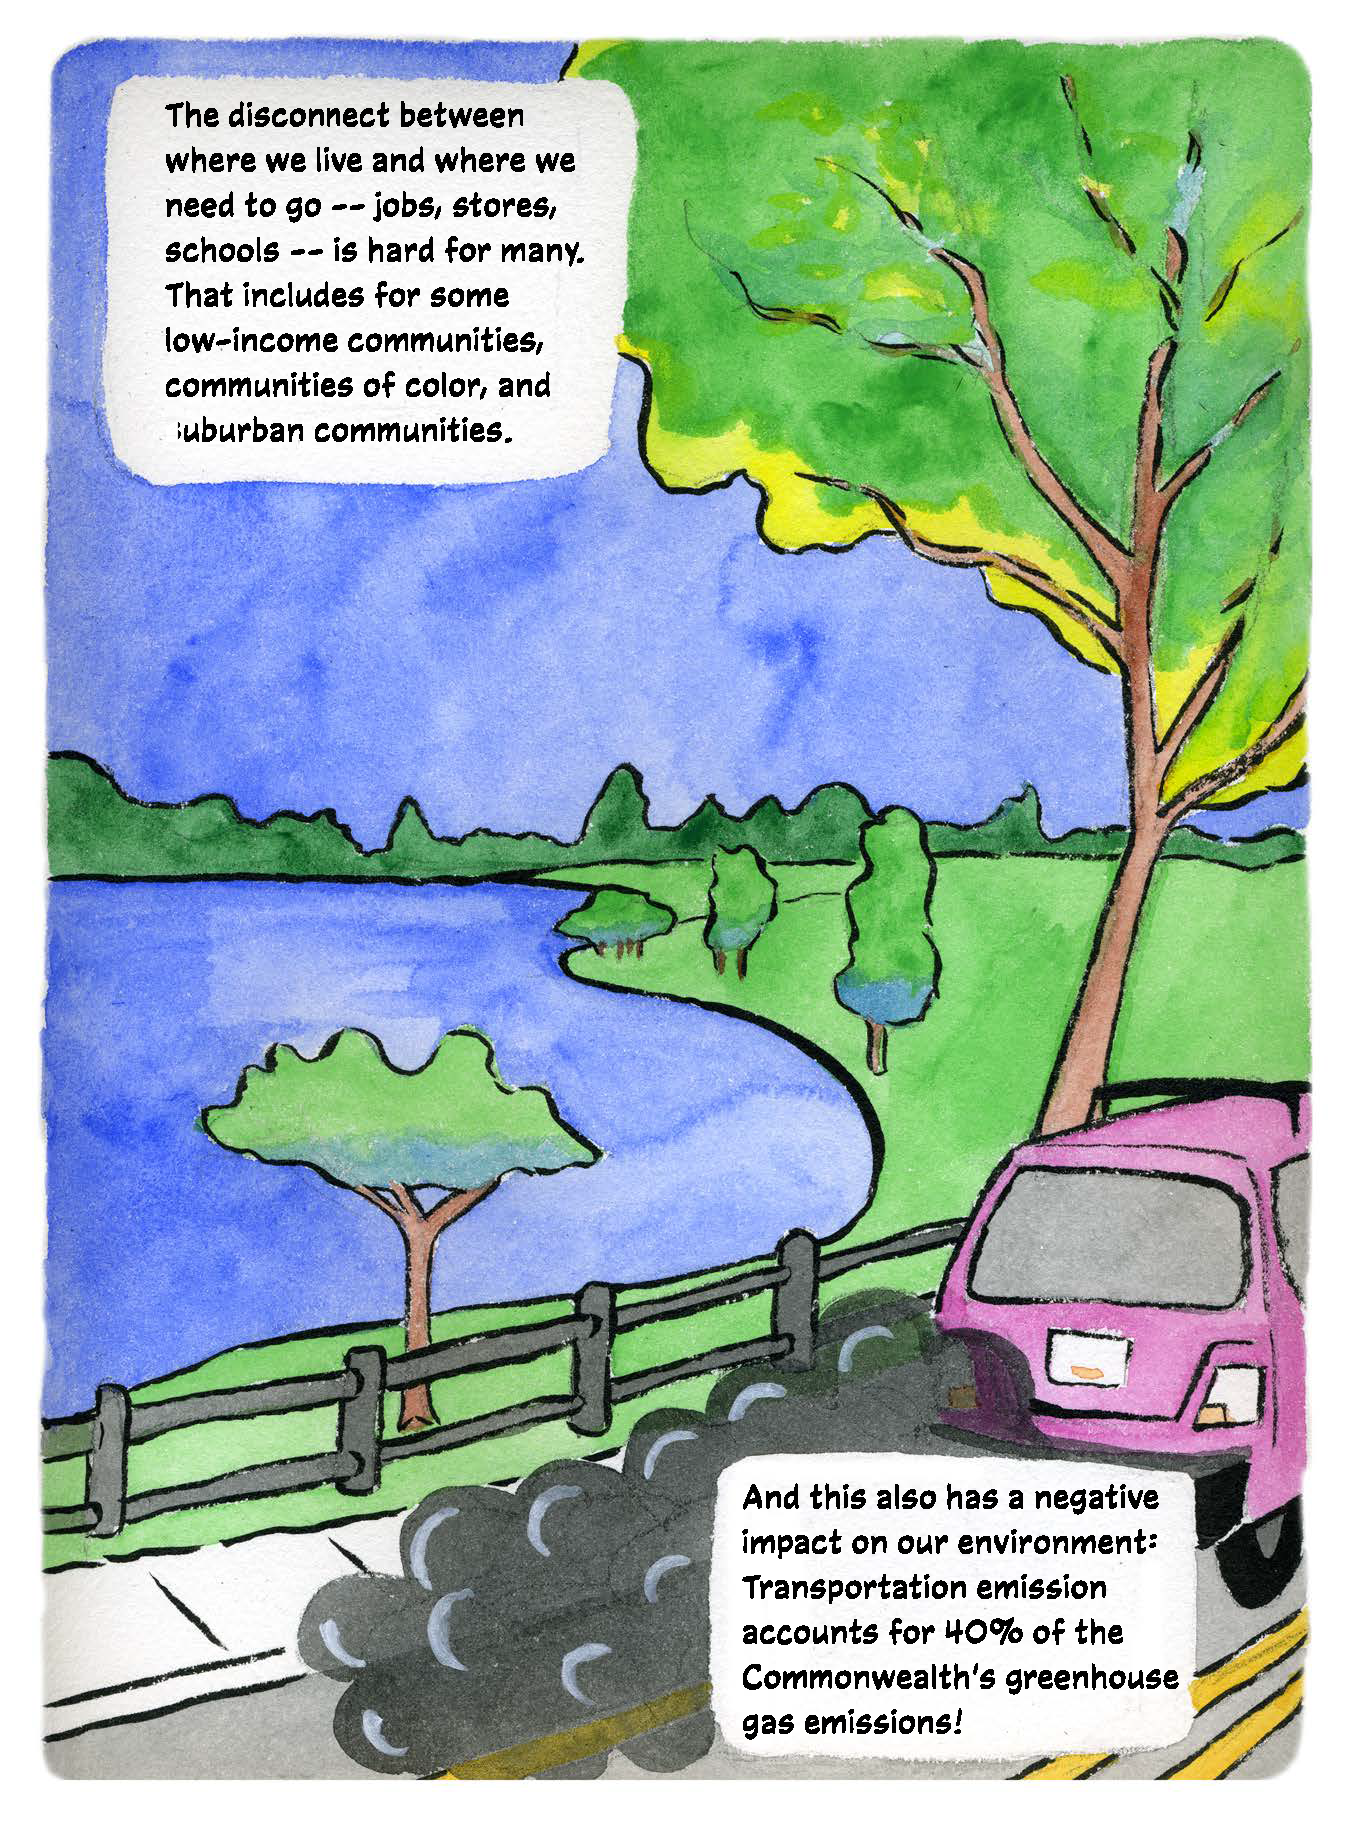 Illustration: Car emits fumes on a road in front of open space and water. Text: The disconnect between where we live and where we need to go -- jobs, stores, schools -- is hard for many. That includes for some low-income communities, communities of color, and suburban communities. And this also has a negative impact on our environment: transportation emissions account for 40% of the Commonwealth's greenhouse gas emissions!